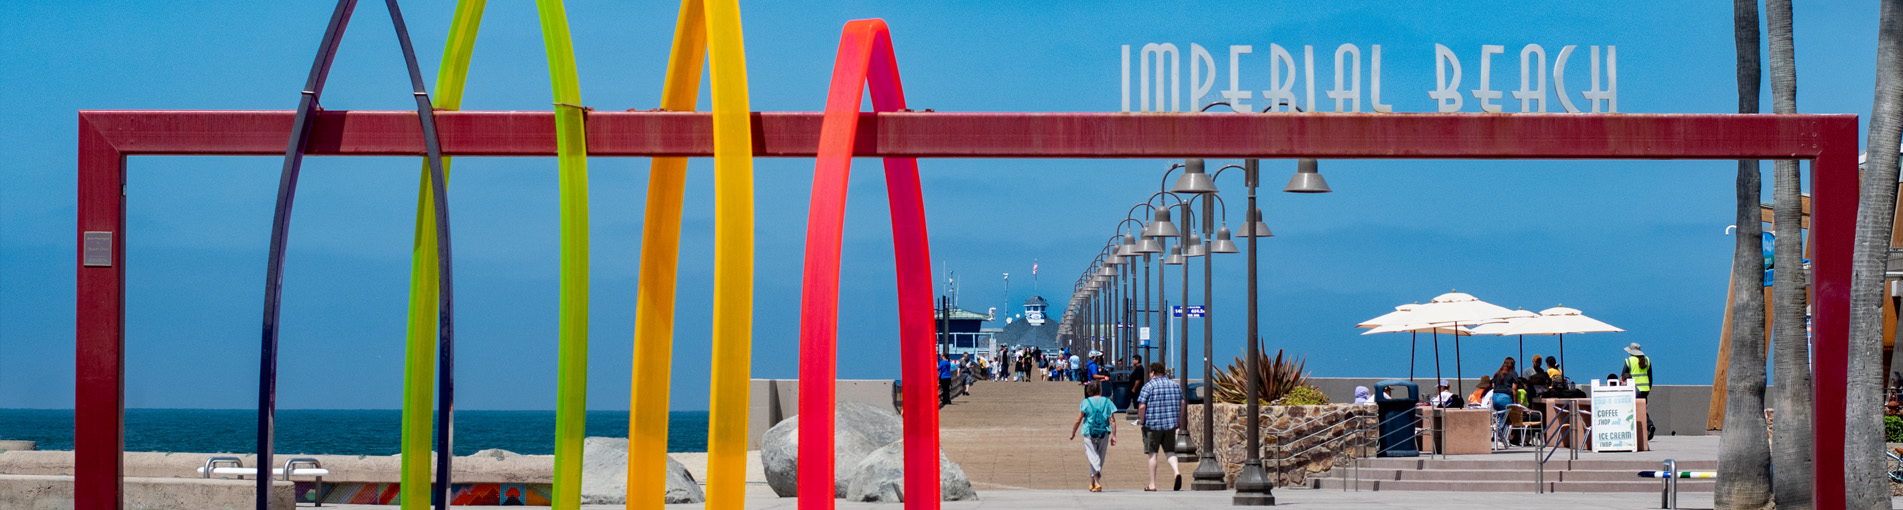 Imperial Beach Entryway Sign